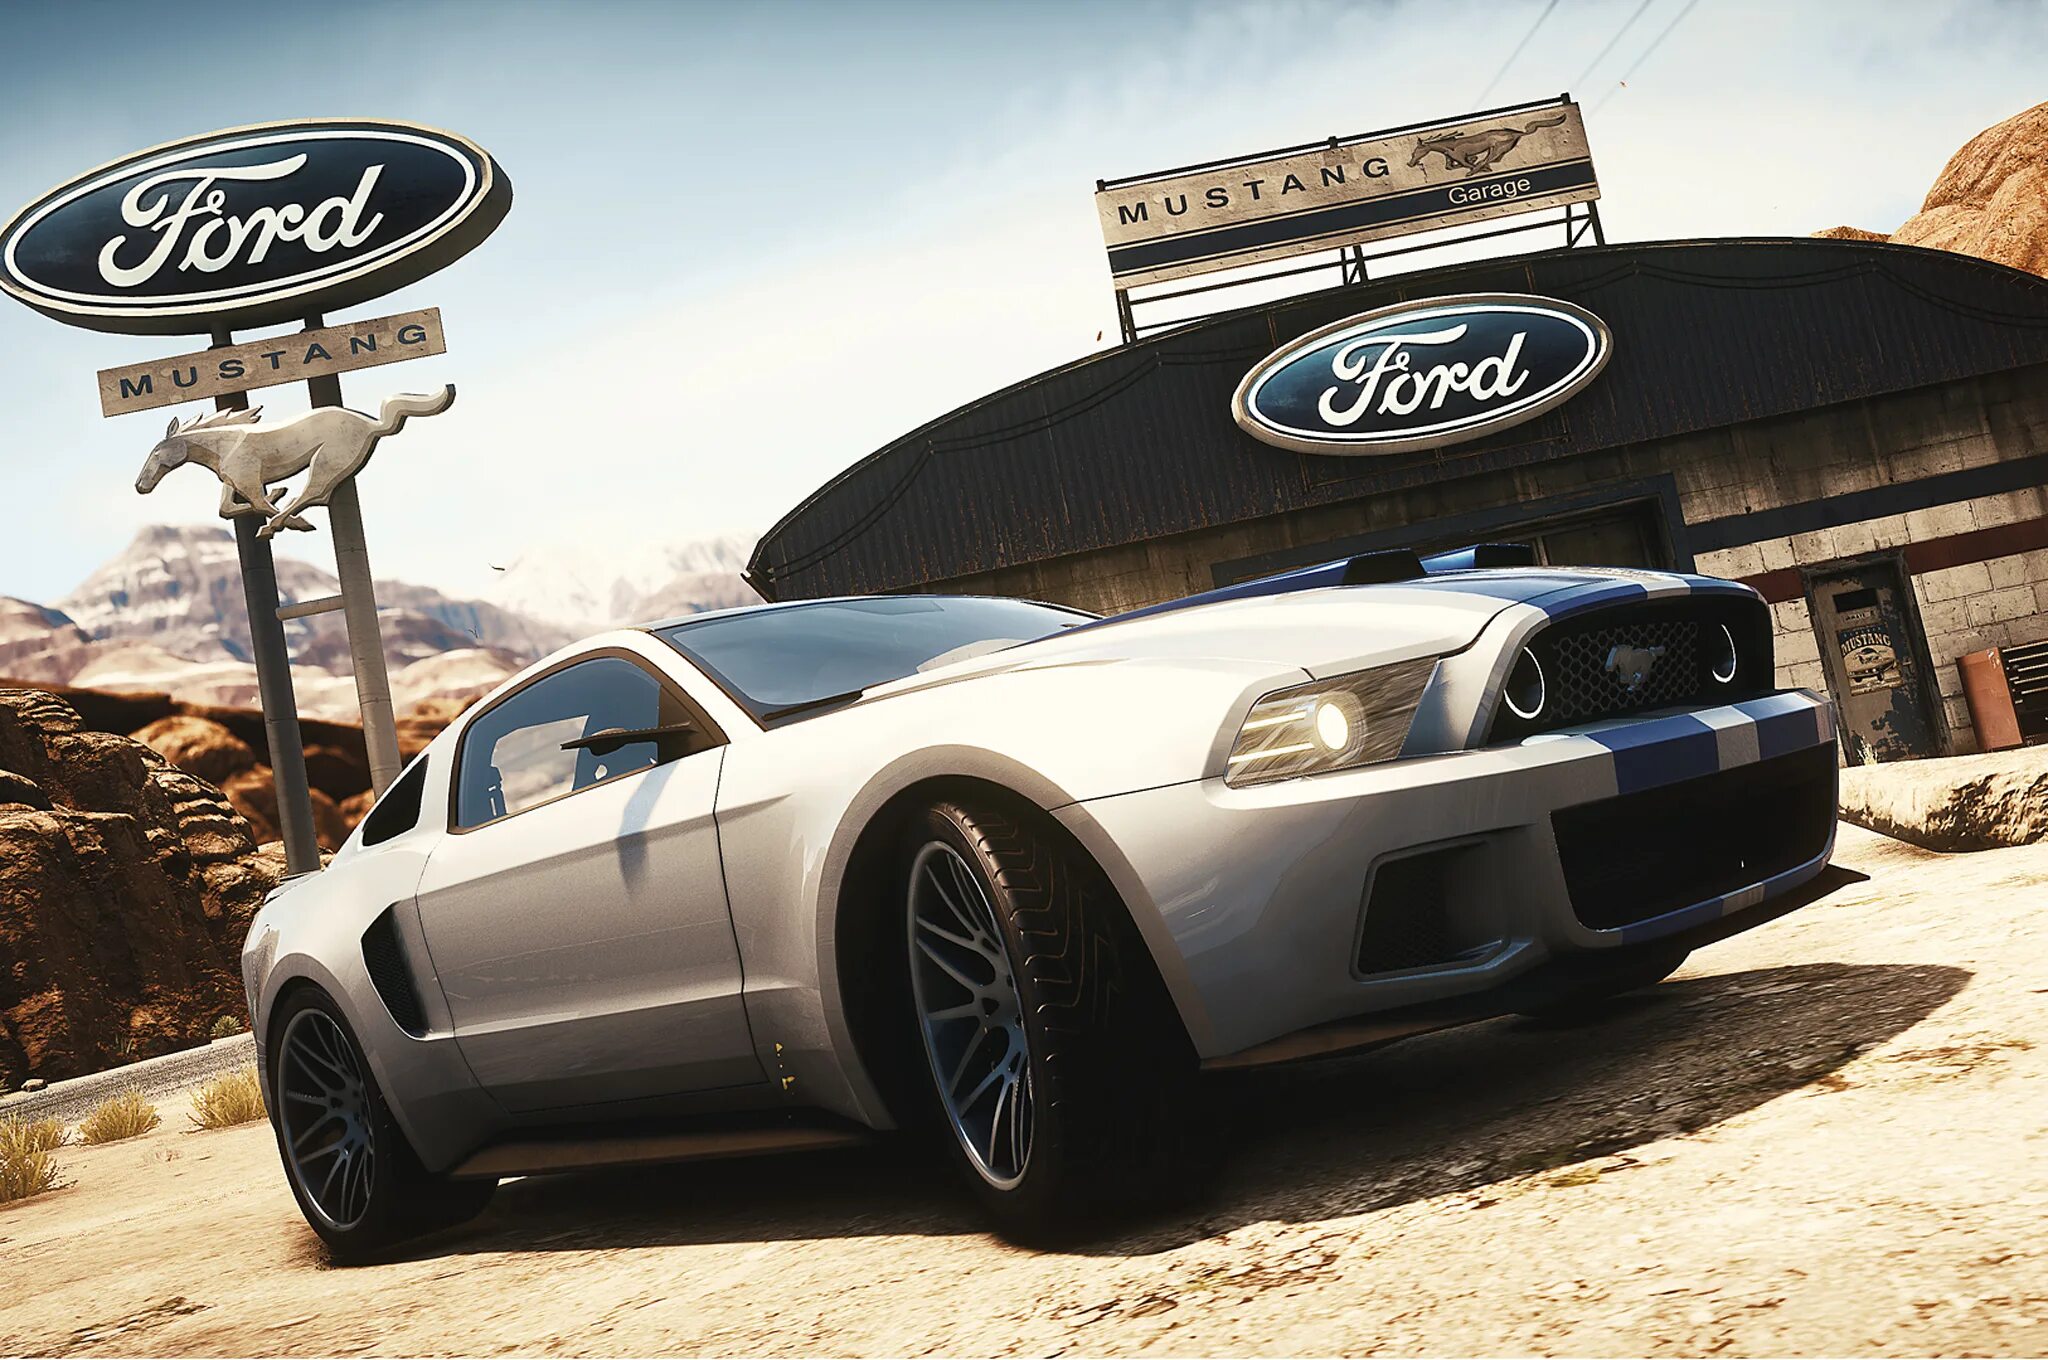 Need for speed мустанг. Ford Mustang NFS 2015. Ford Mustang NFS. Форд Мустанг NFS 2015. NFS 2015 Ford Mustang gt.